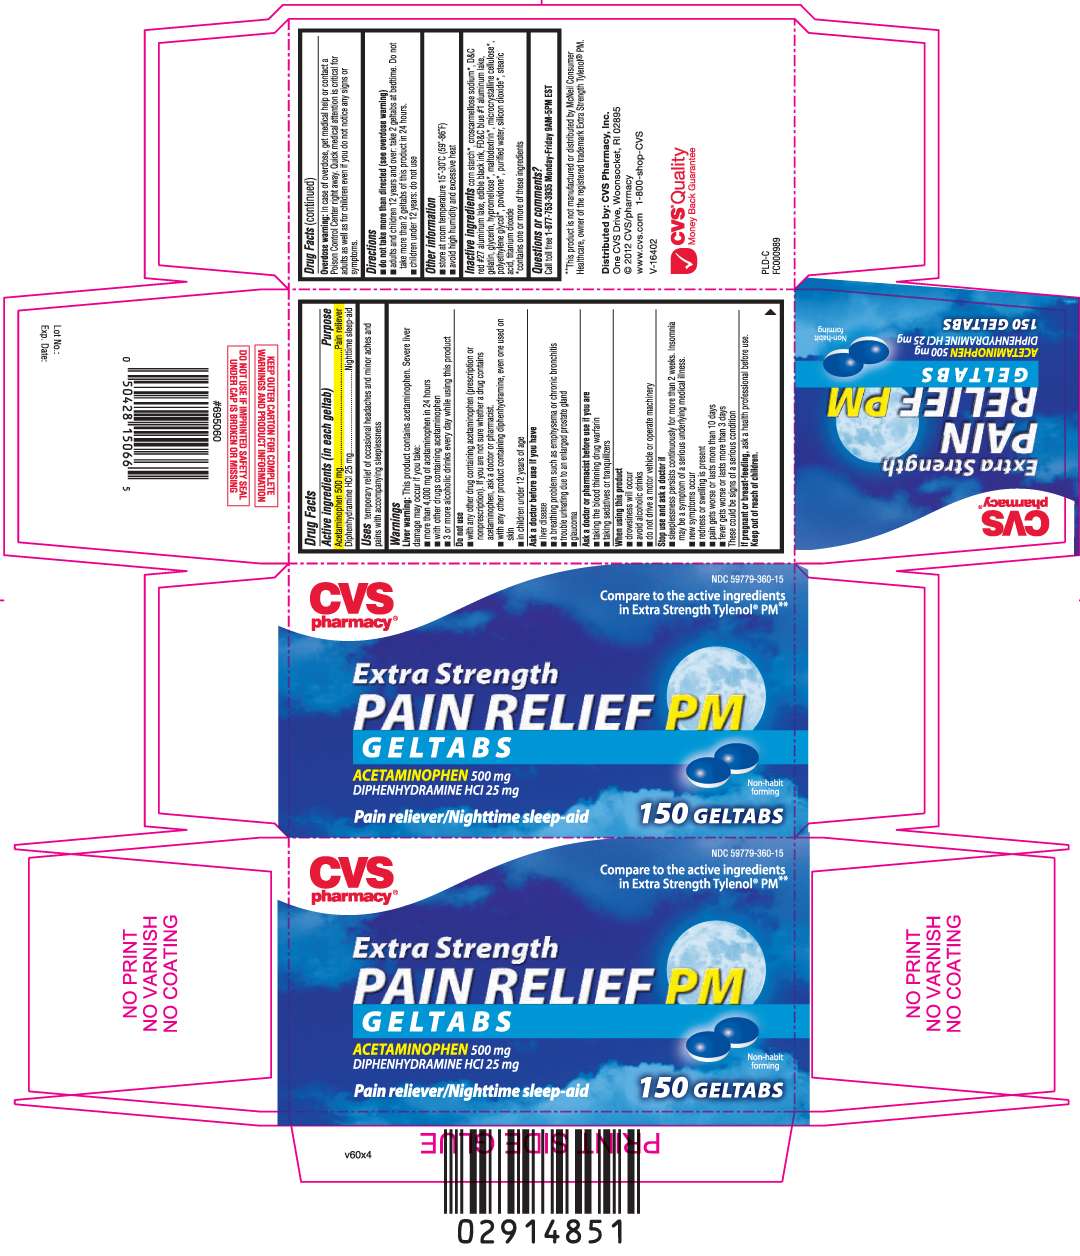 PAIN RELIEF PM